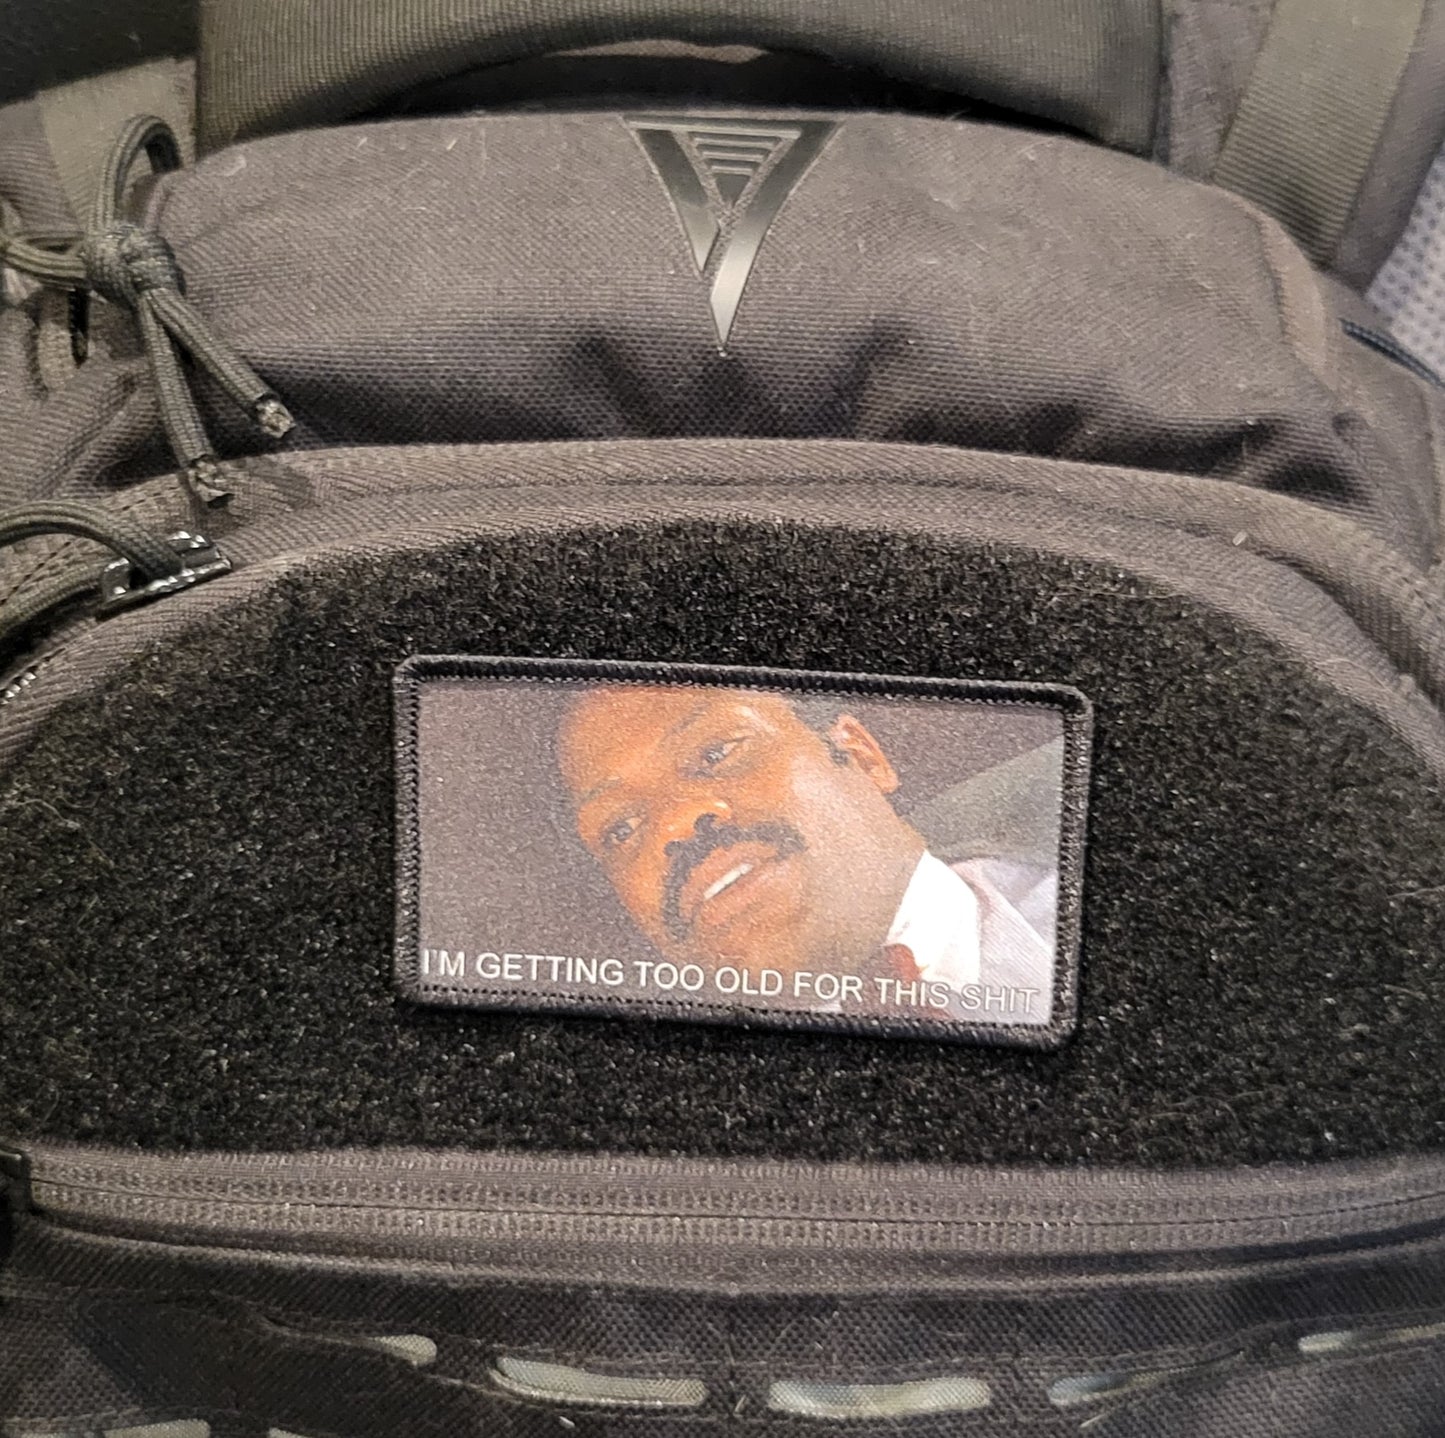 "I'm Getting Too Old For This Shit" - Lethal Weapon Inspired Patch